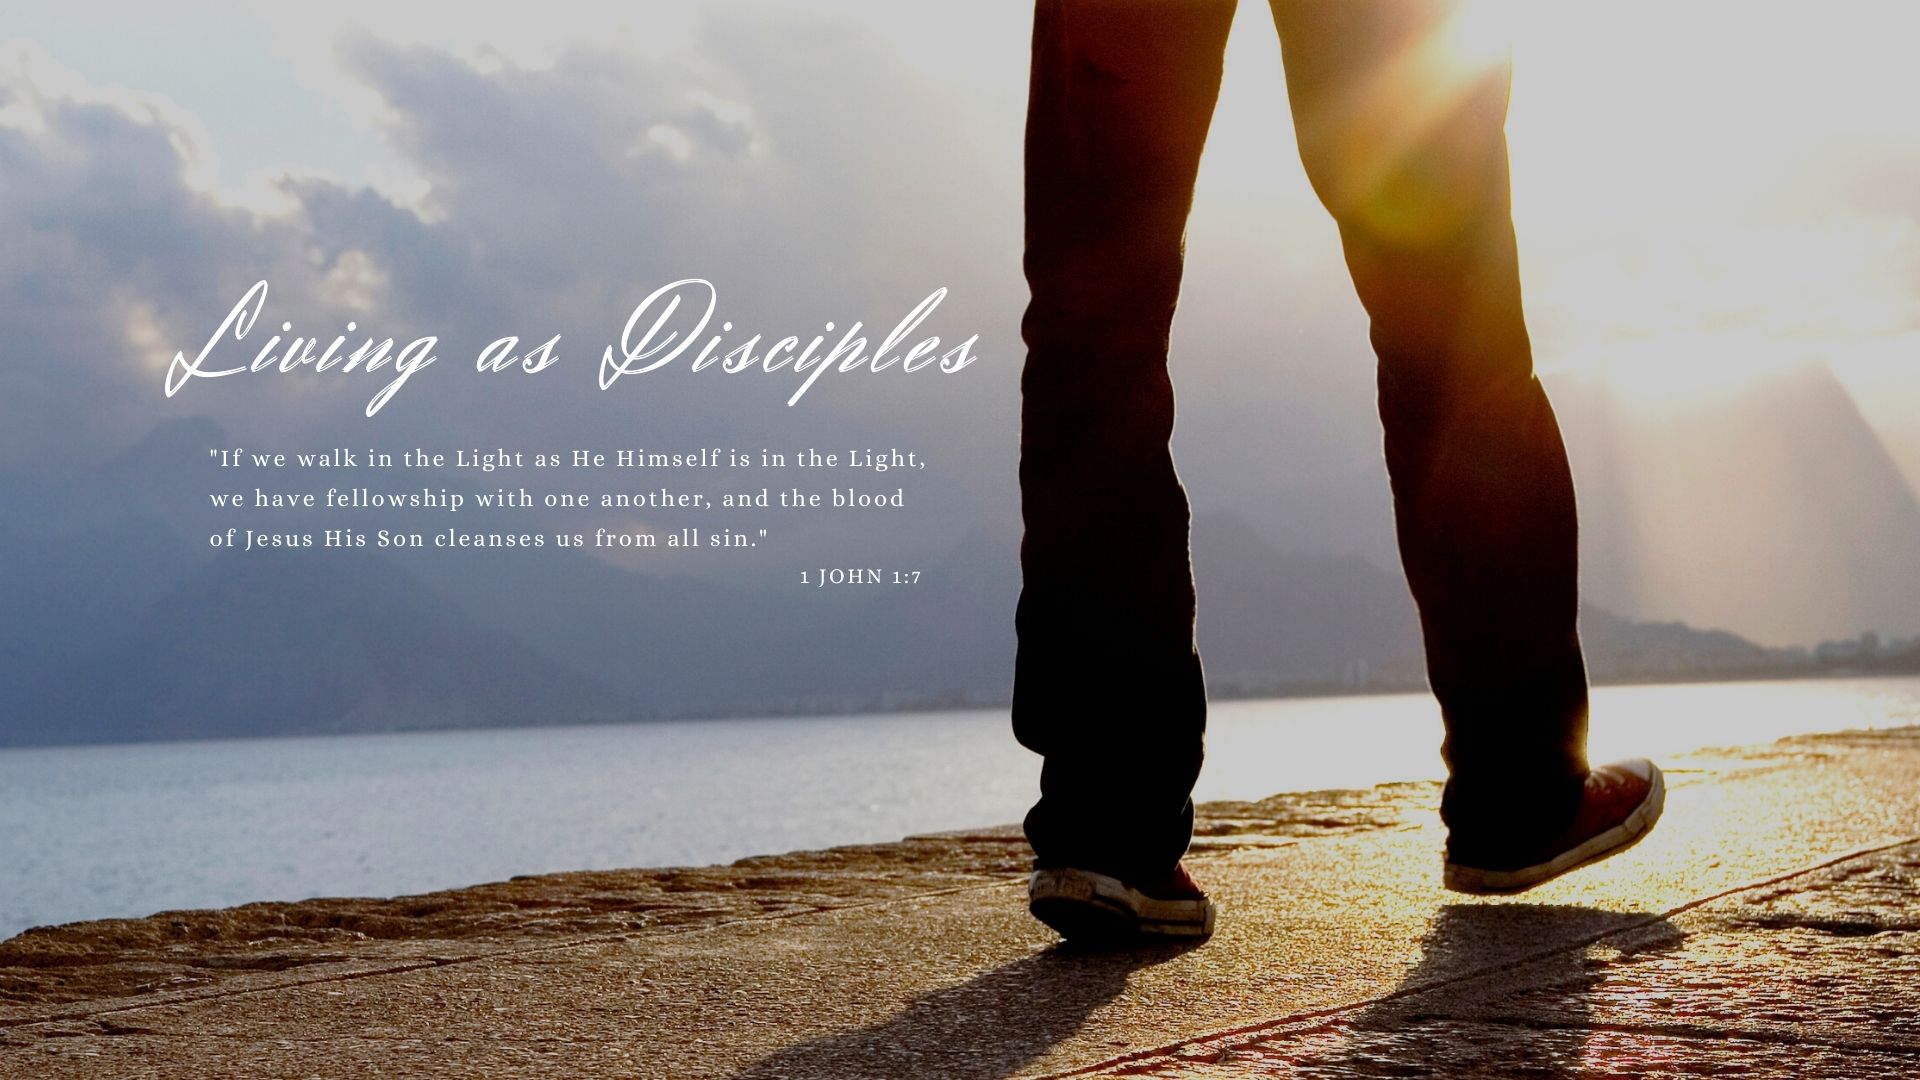 Living as Disciples: Walk in the Light